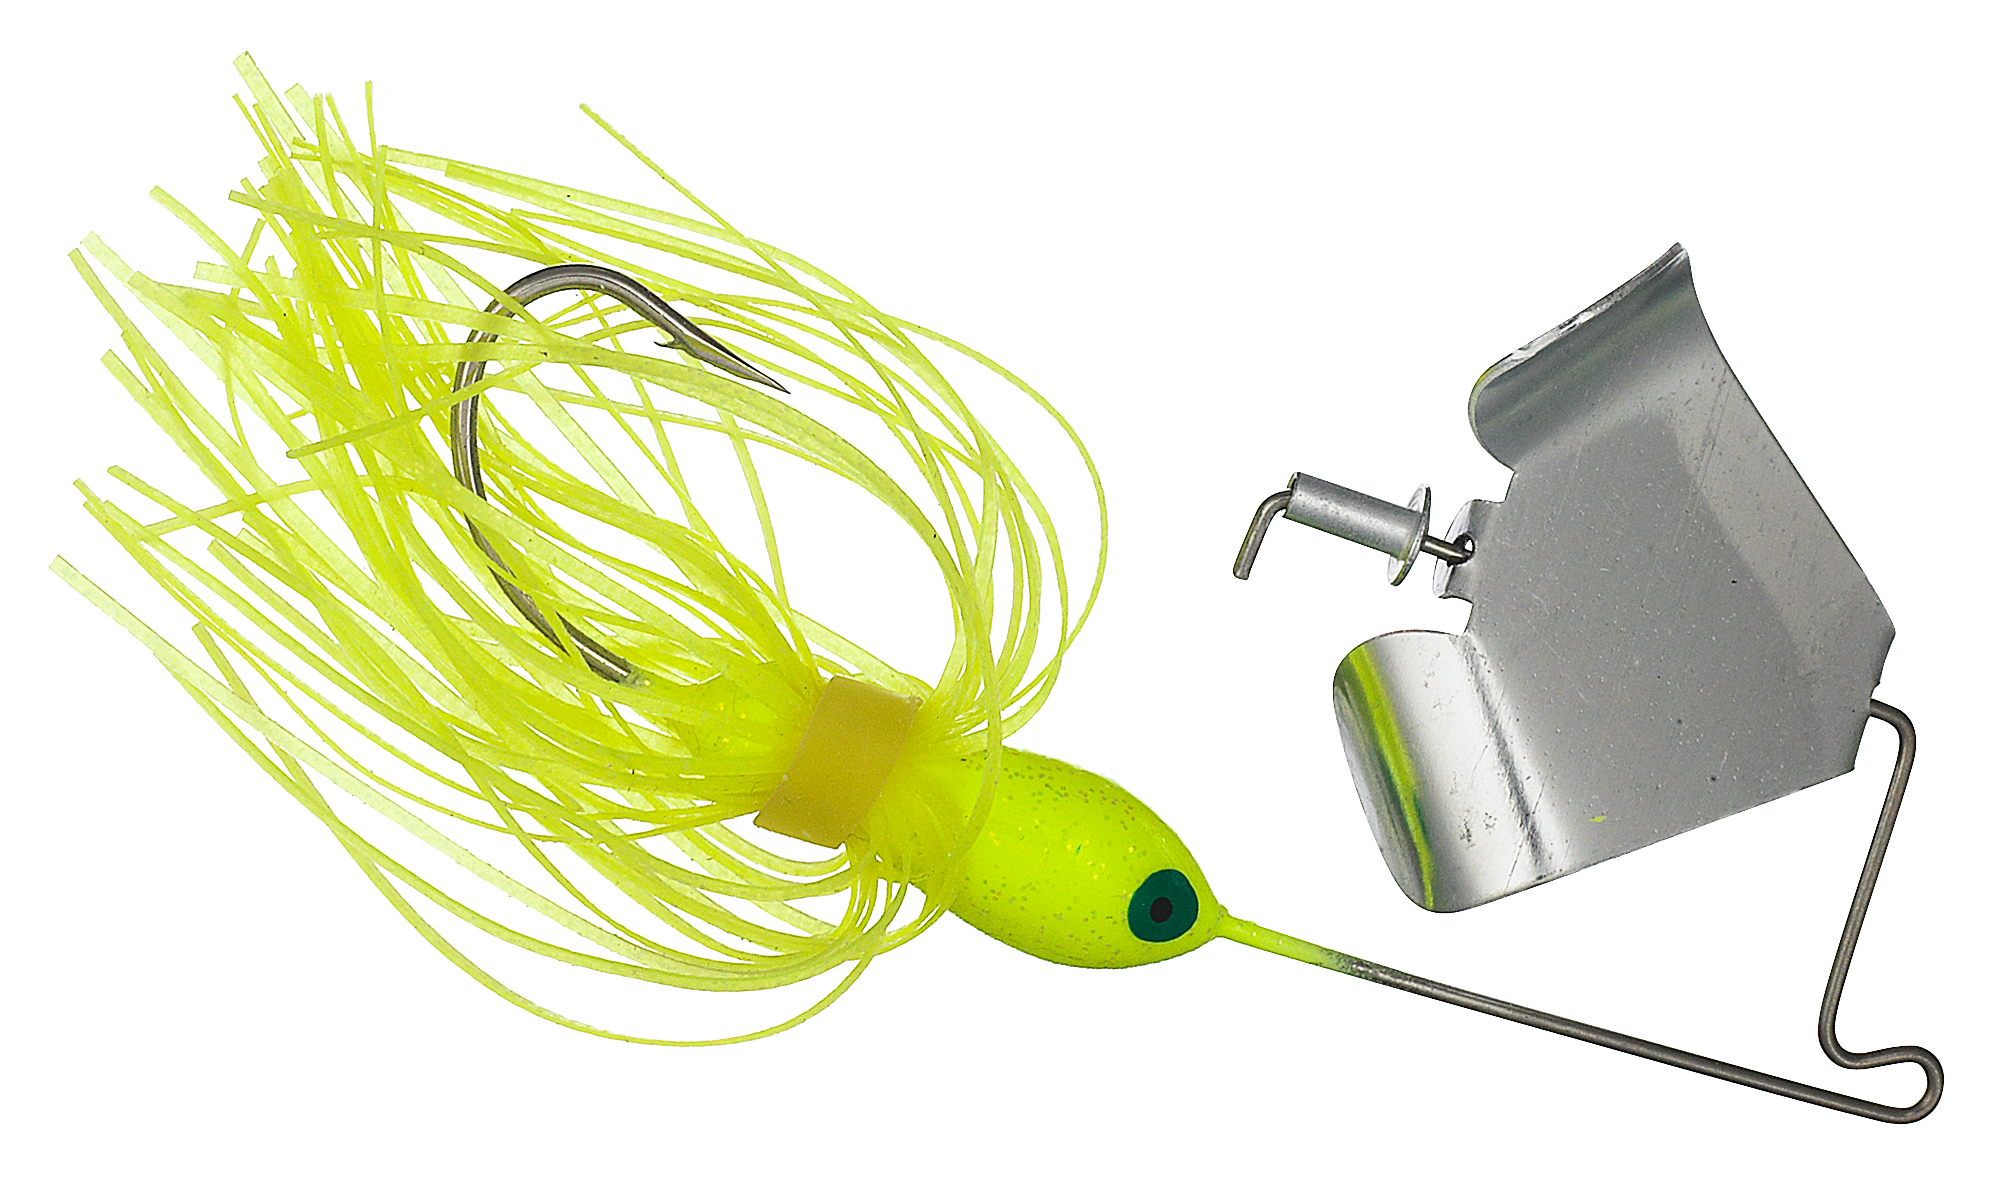 BOOYAH Buzz - Citrus Shad - 3/8 oz, Spinners & Spinnerbaits -  Canada